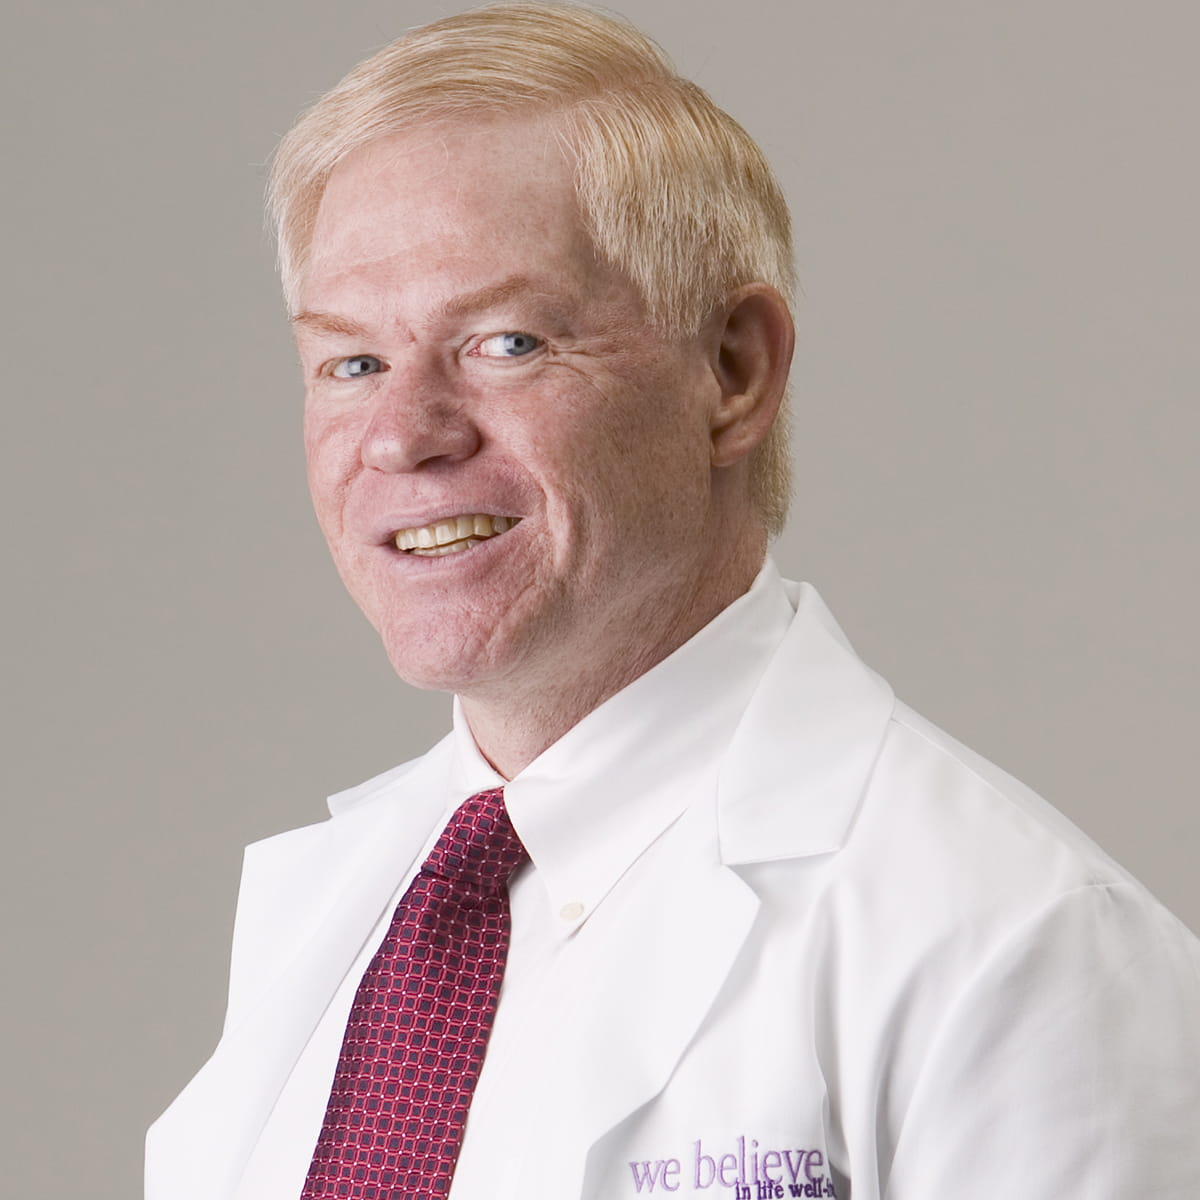 A friendly headshot of James Nalley, MD